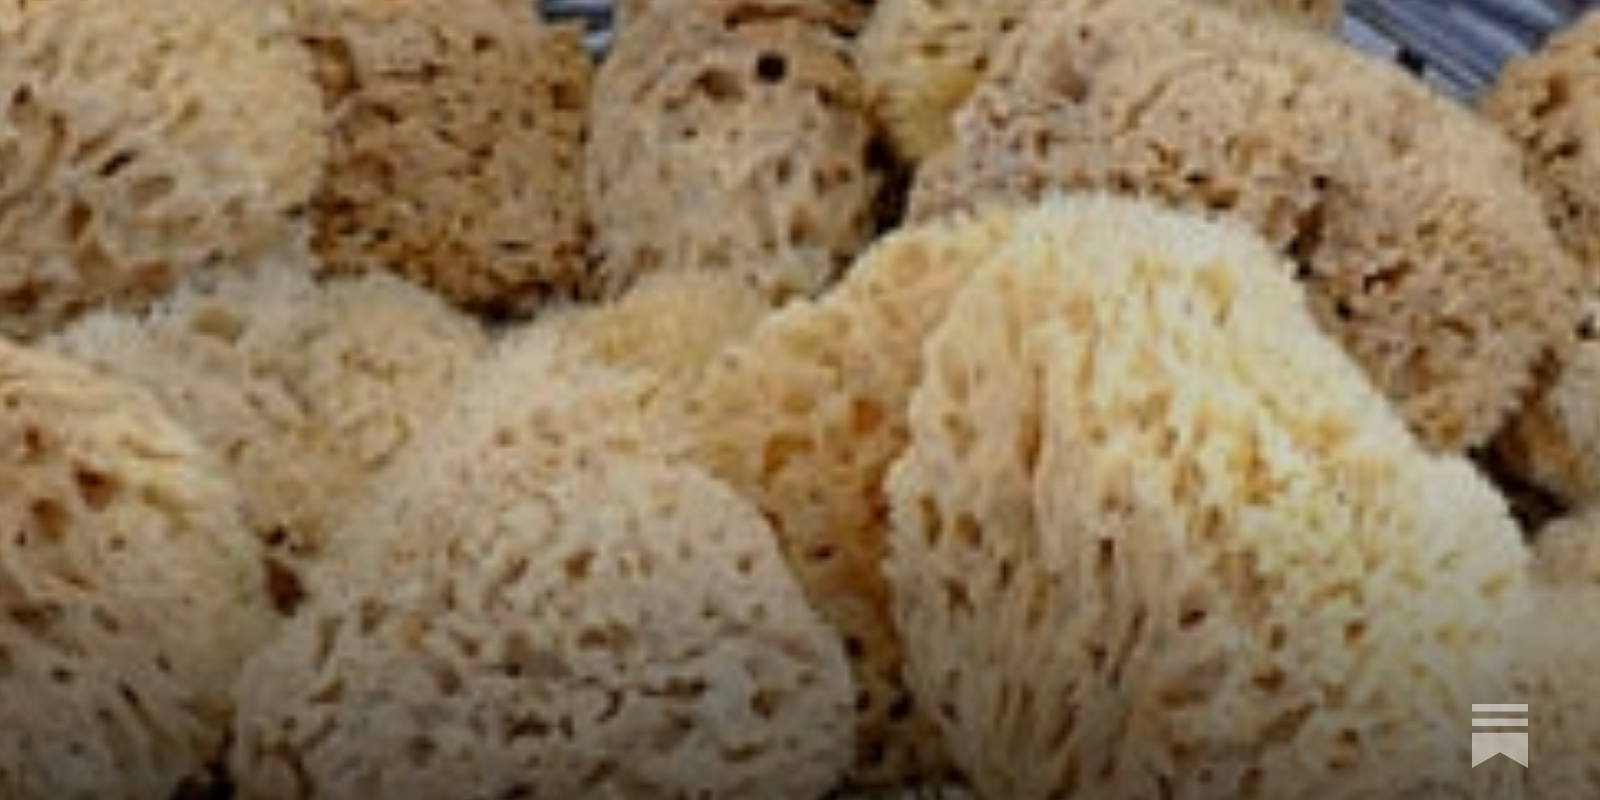 Natural Sea Sponges Are Not A Safe Alternative To Tampons, Science Pleads